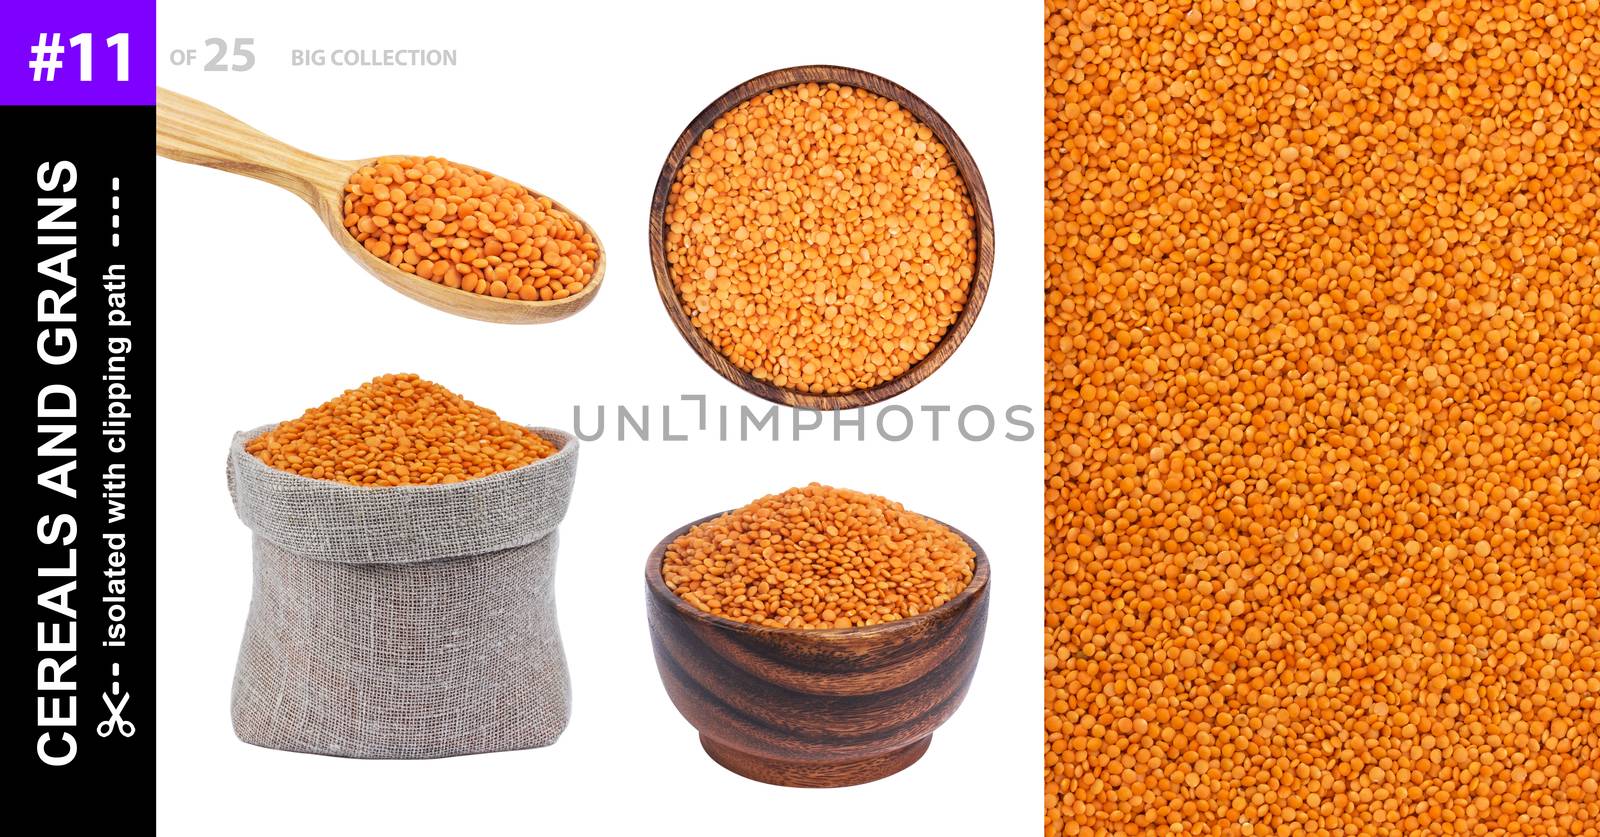 Red lentils in different dishware isolated on white background, red lentils in bowl, spoon and bag, collection